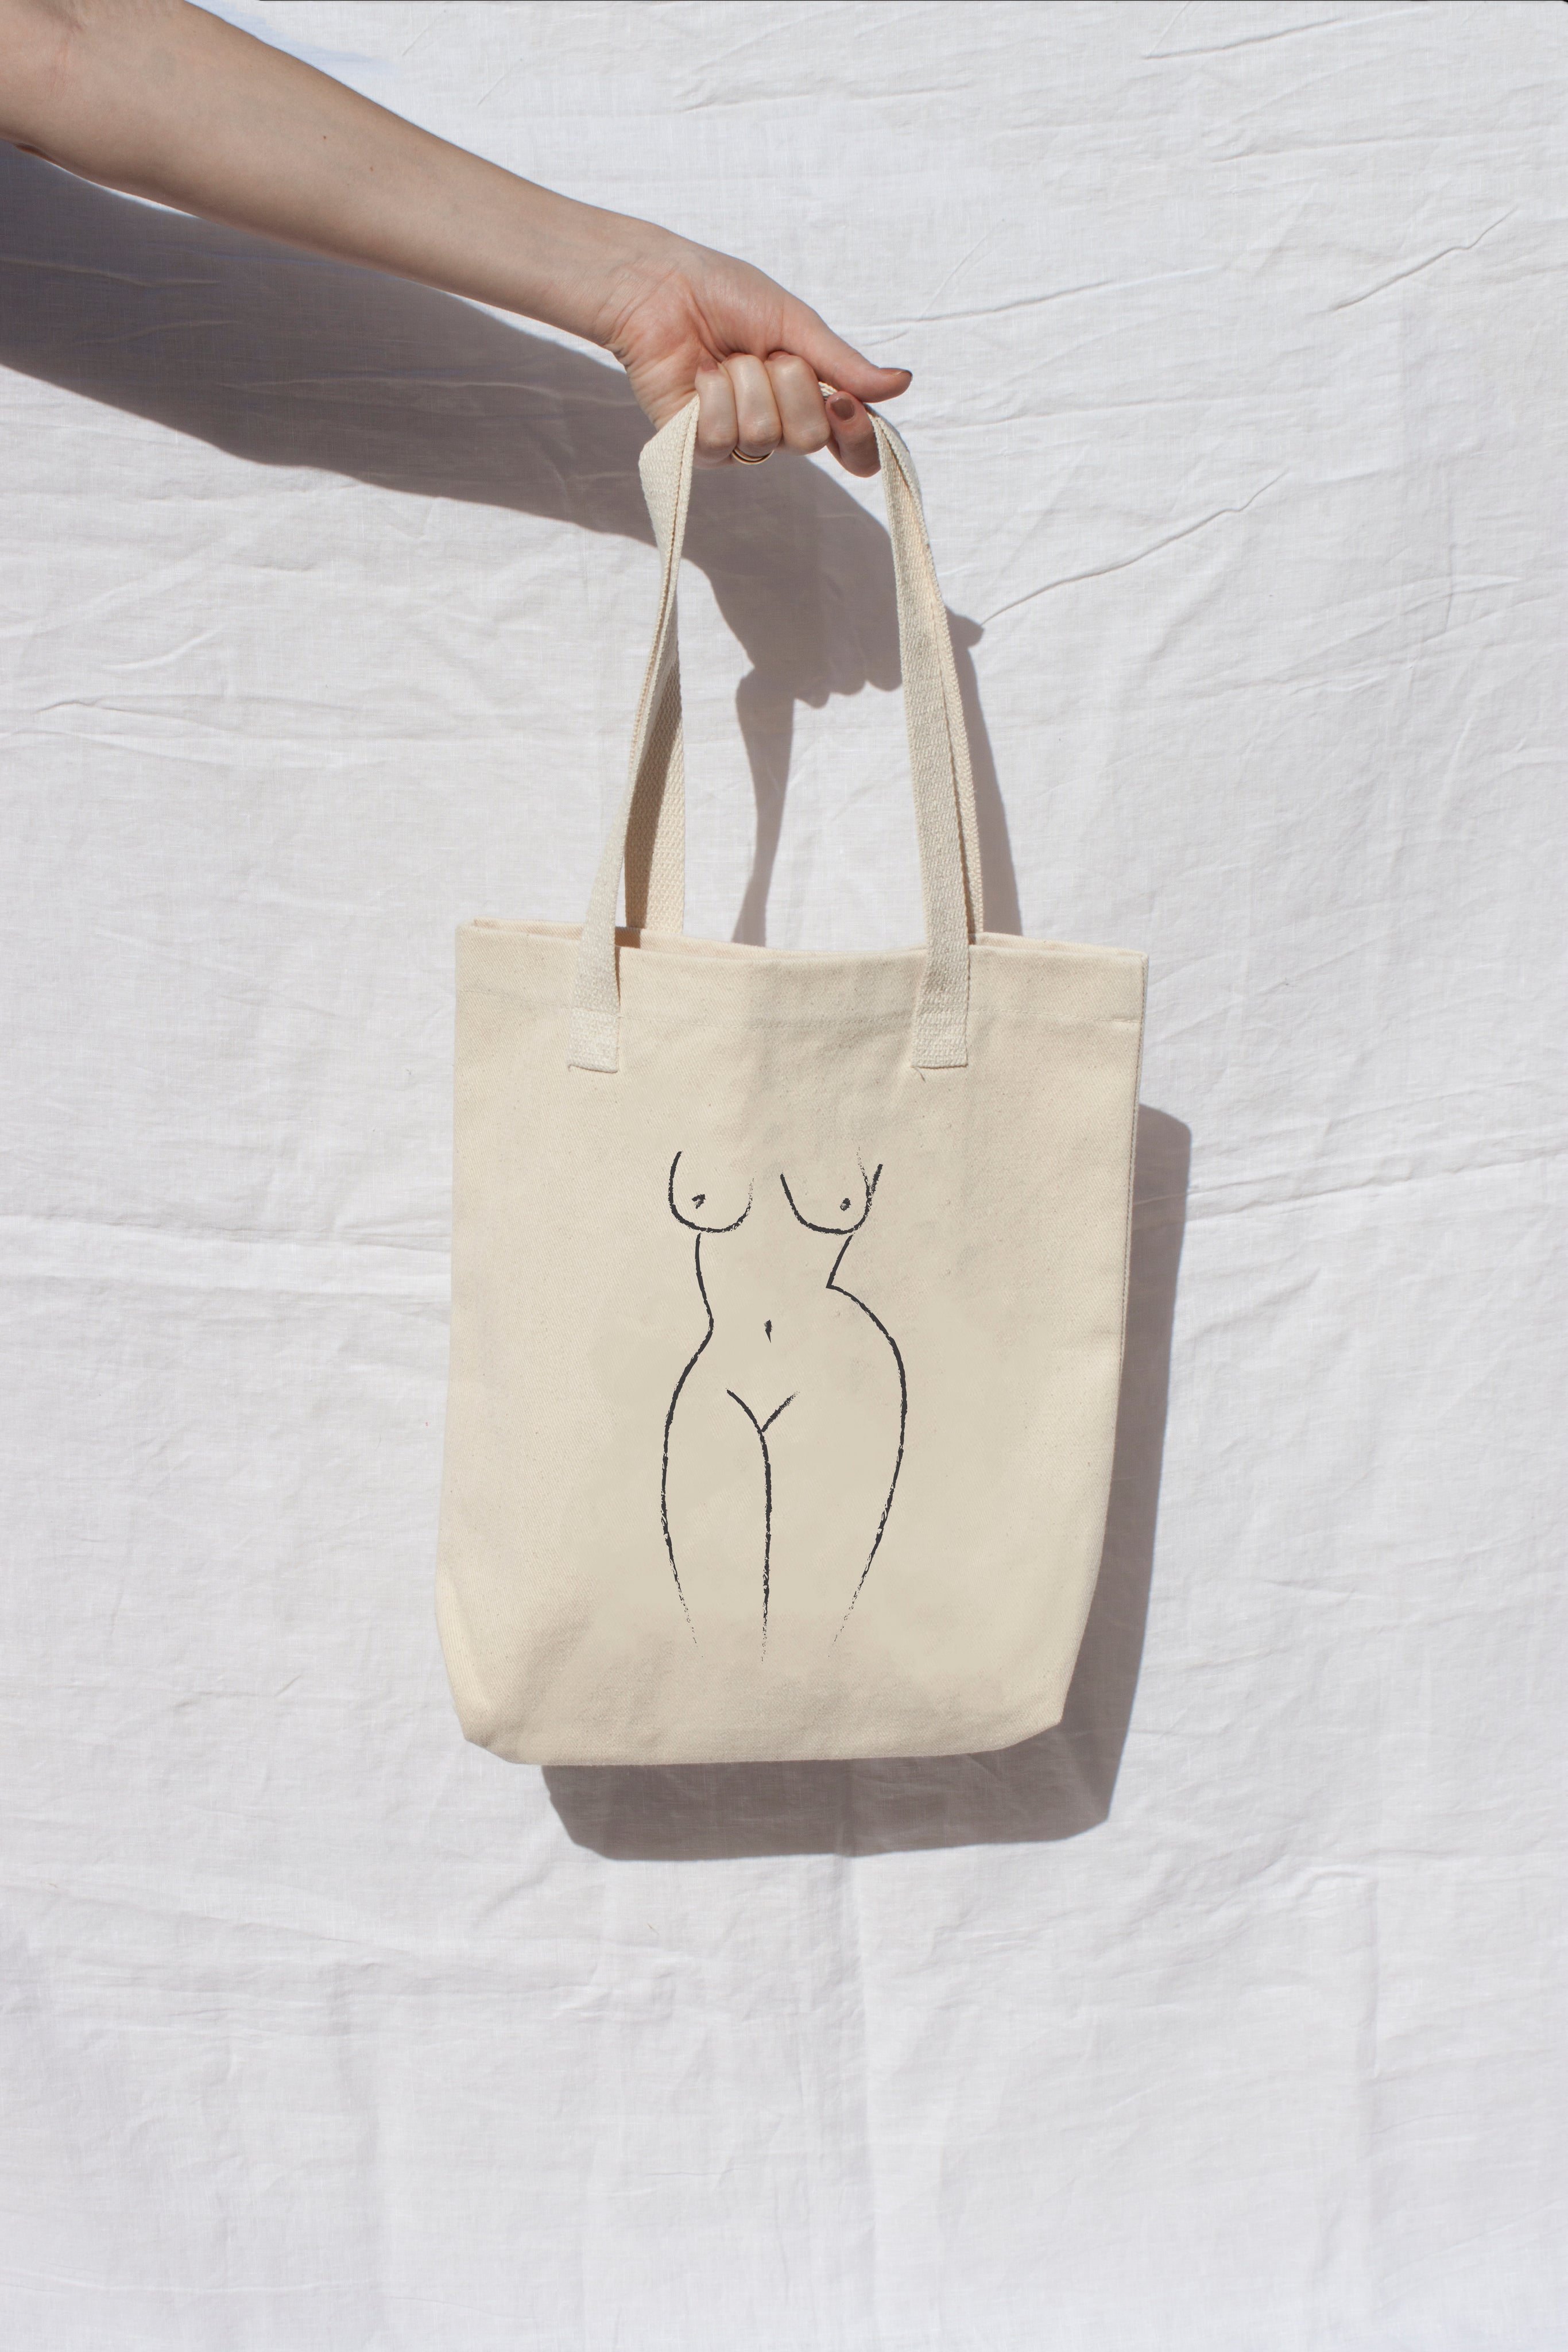 New Tote Bag Collection: Art you can wear. – THE PRINTABLE CØNCEPT™